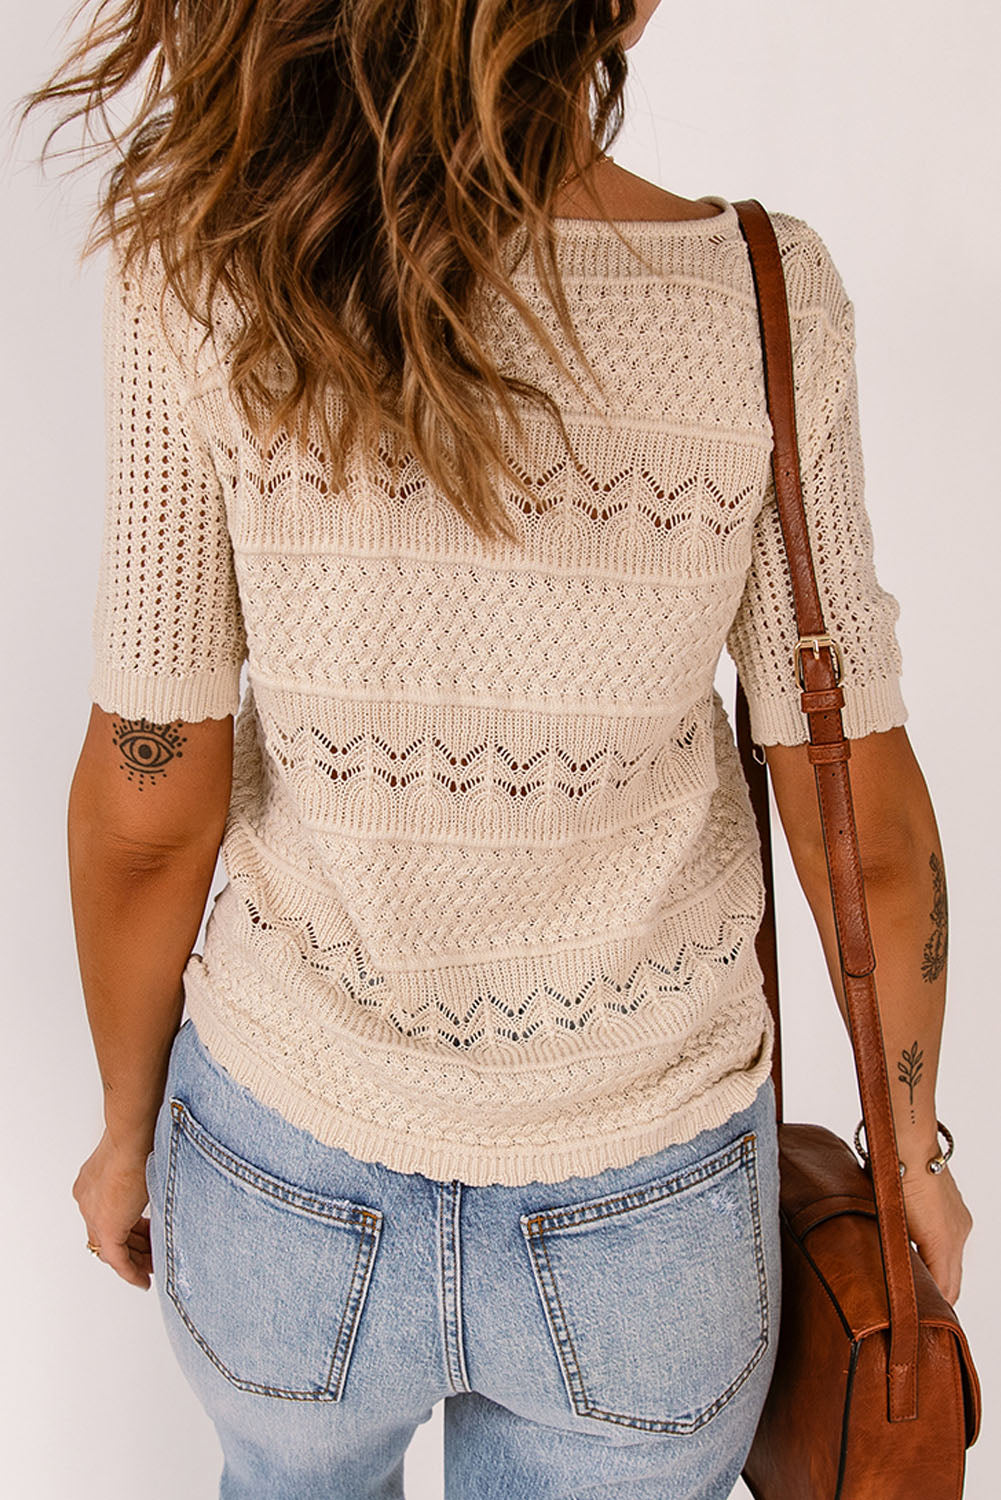 Openwork knitted shorts